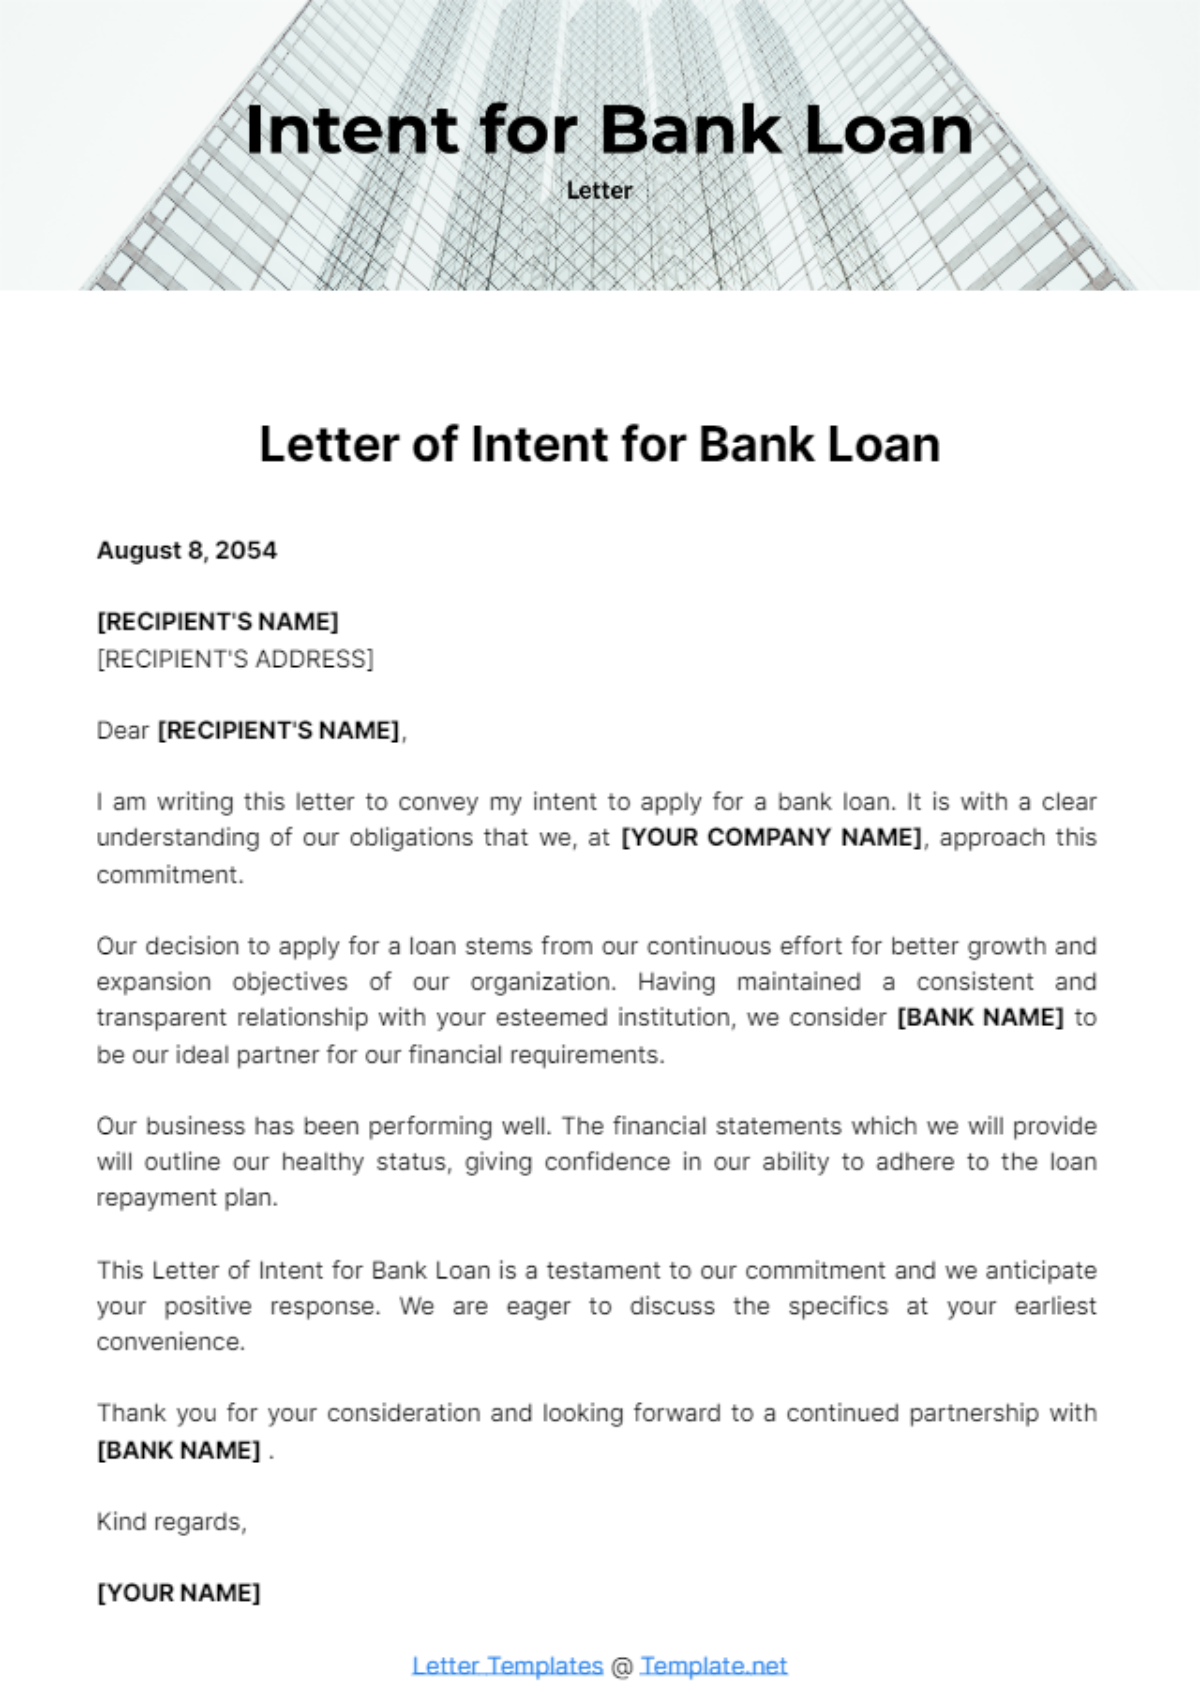 Free Letter of Intent for Bank Loan Template